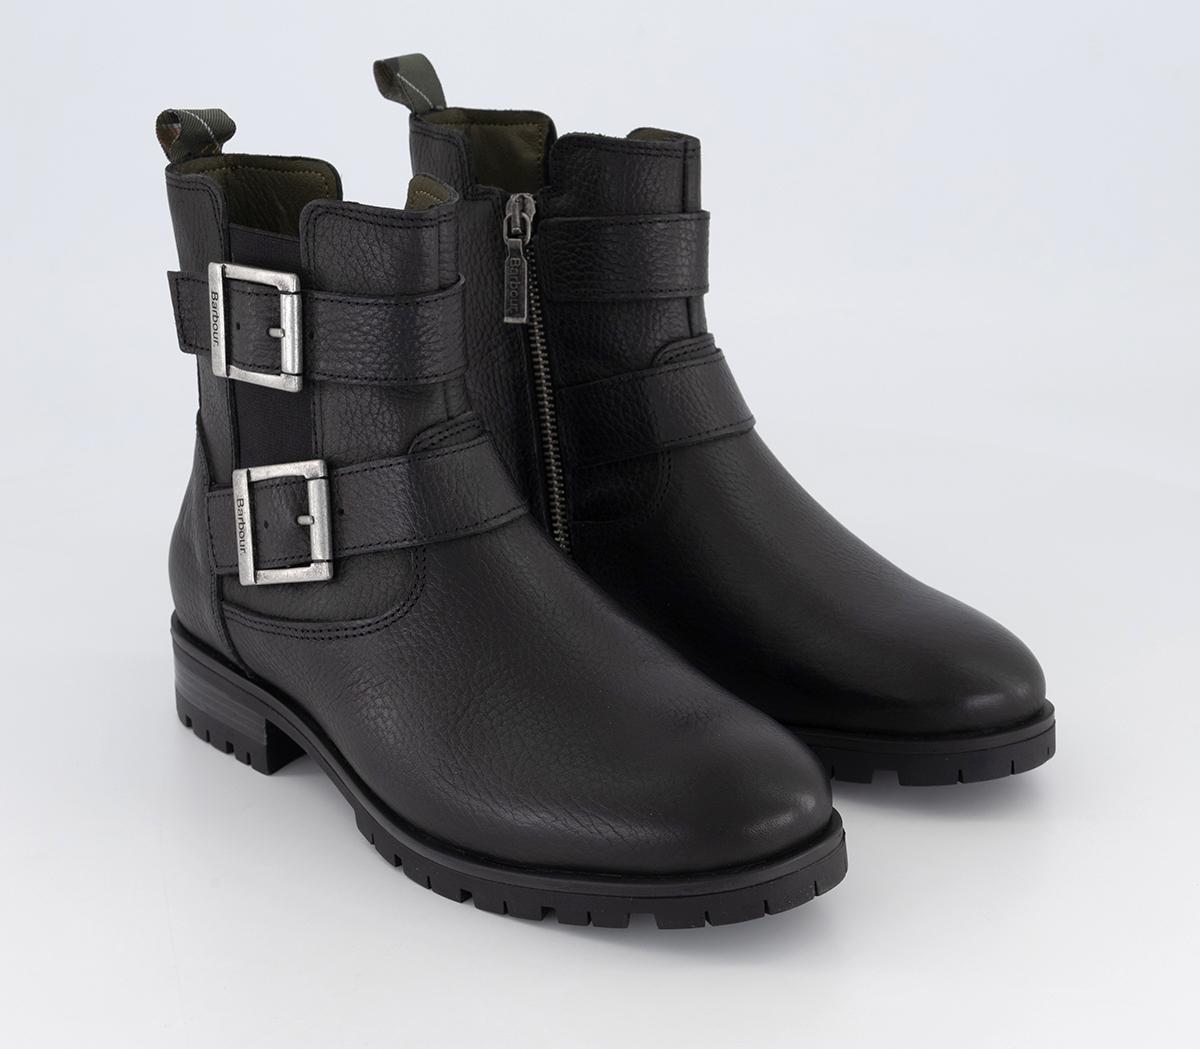 Barbour Marina Buckle Boots Black - Women's Ankle Boots